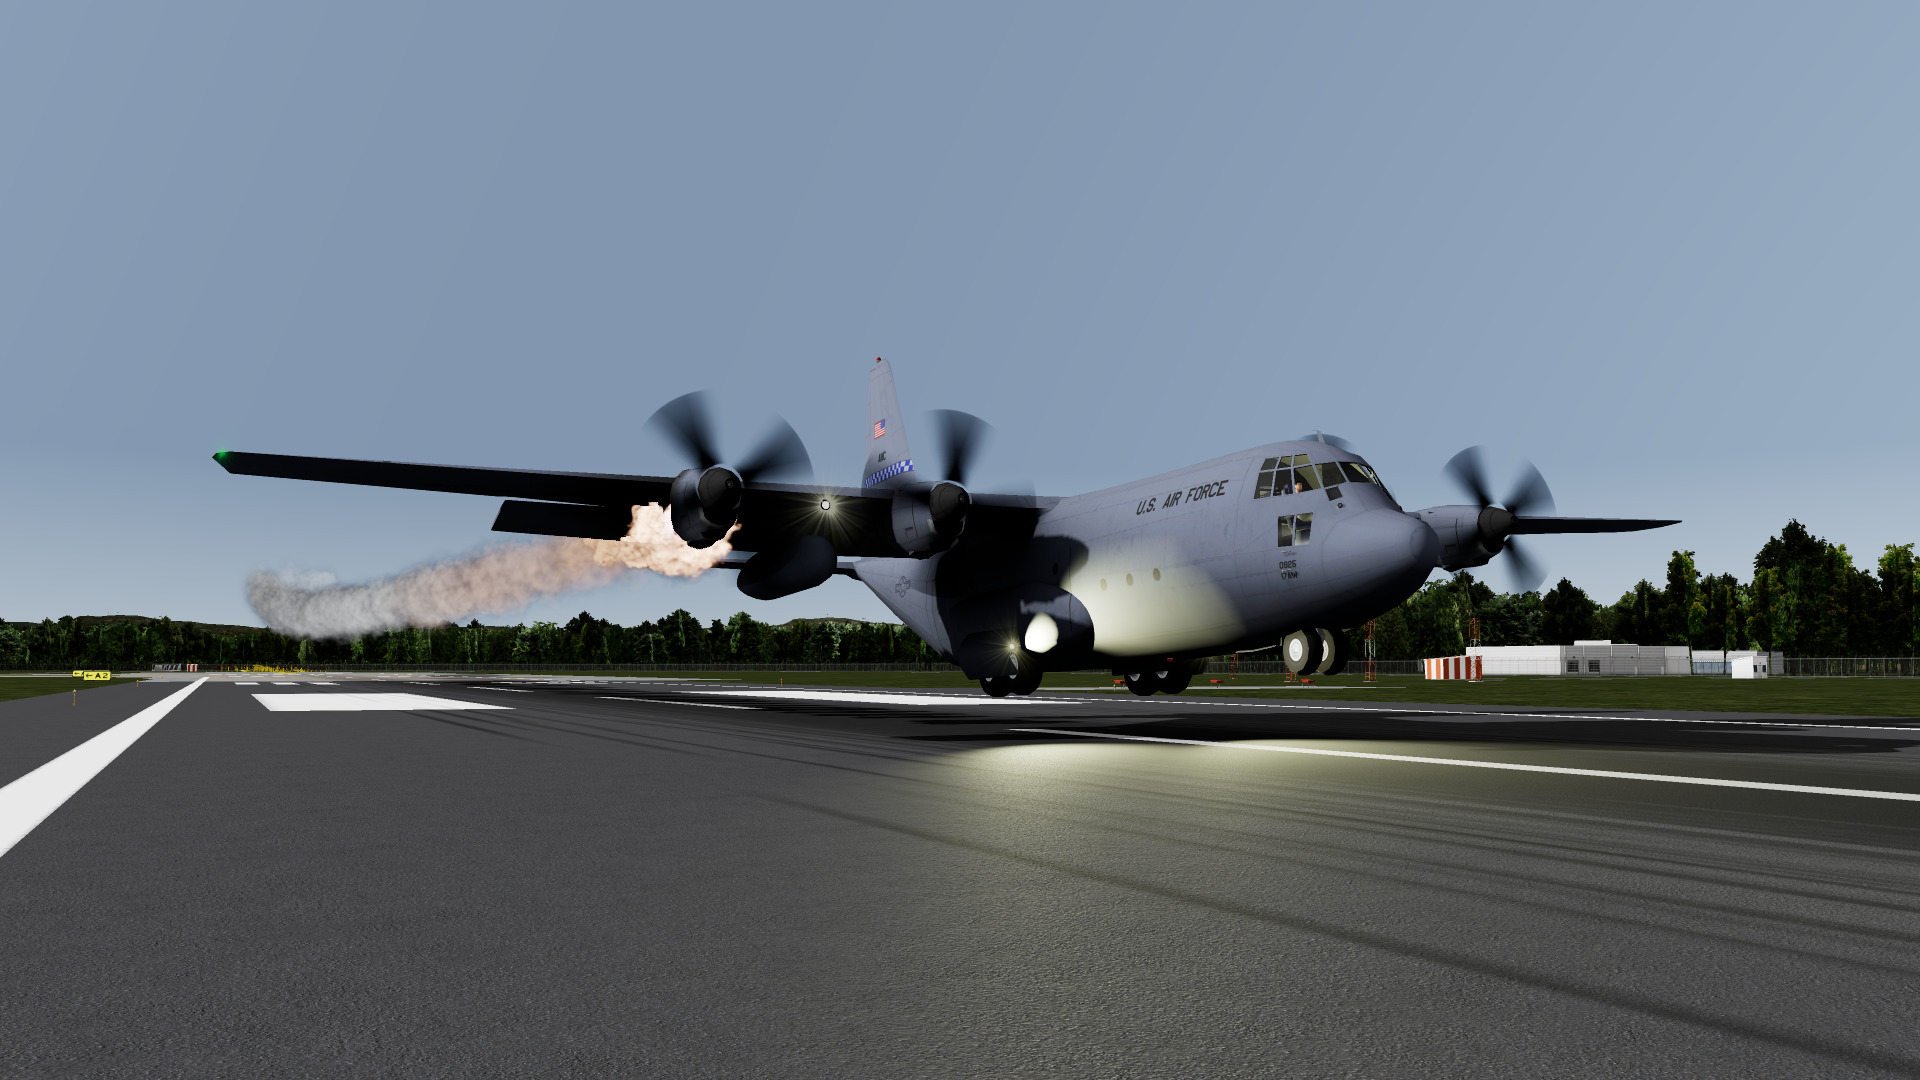 USAF C-130 emergency landing with an engine fire to train incident command and ARFF  response with Airbase ADMS Simulation.